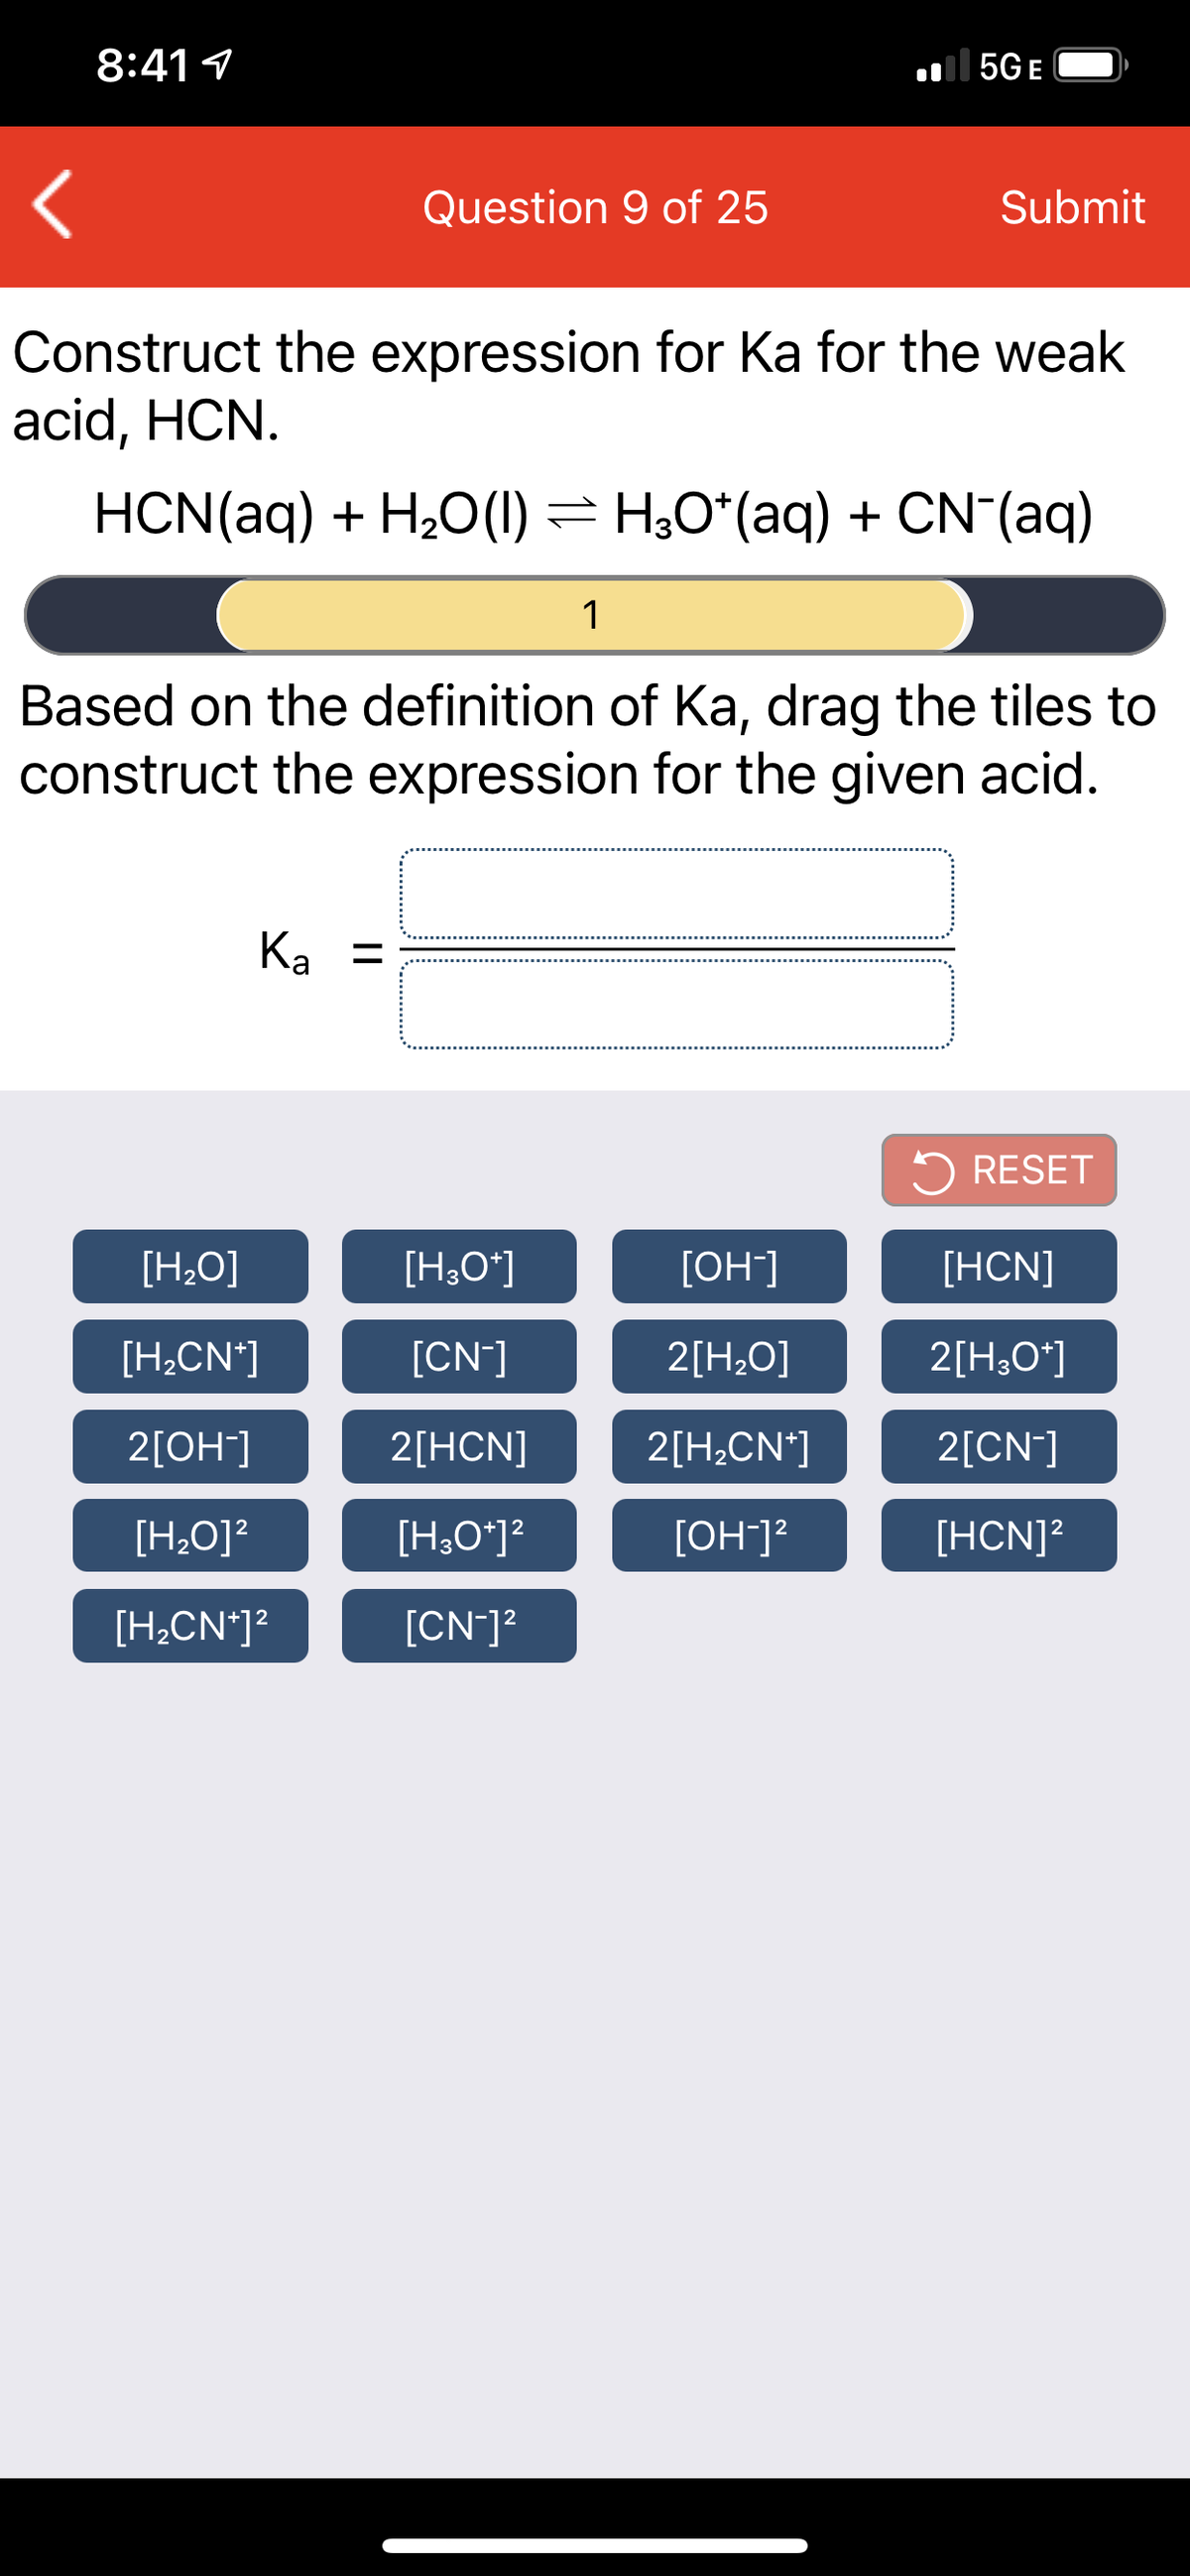 8:41 1
| 5G E
Question 9 of 25
Submit
Construct the expression for Ka for the weak
acid, HCN.
HCN(aq) + H2O(1) = H;0*(aq) + CN (aq)
1
Based on the definition of Ka, drag the tiles to
construct the expression for the given acid.
Ka =
5 RESET
[H20]
[H;O*]
[OH]
[HCN]
[H,CN*]
[CN]
2[H;O]
2[H;O*]
2[ОН]
2[HCN]
2[H;CN*]
2[CN]
[H,O]?
[H;O*]?
[OH]?
[HCN]?
[H,CN*]?
[CN-]?
